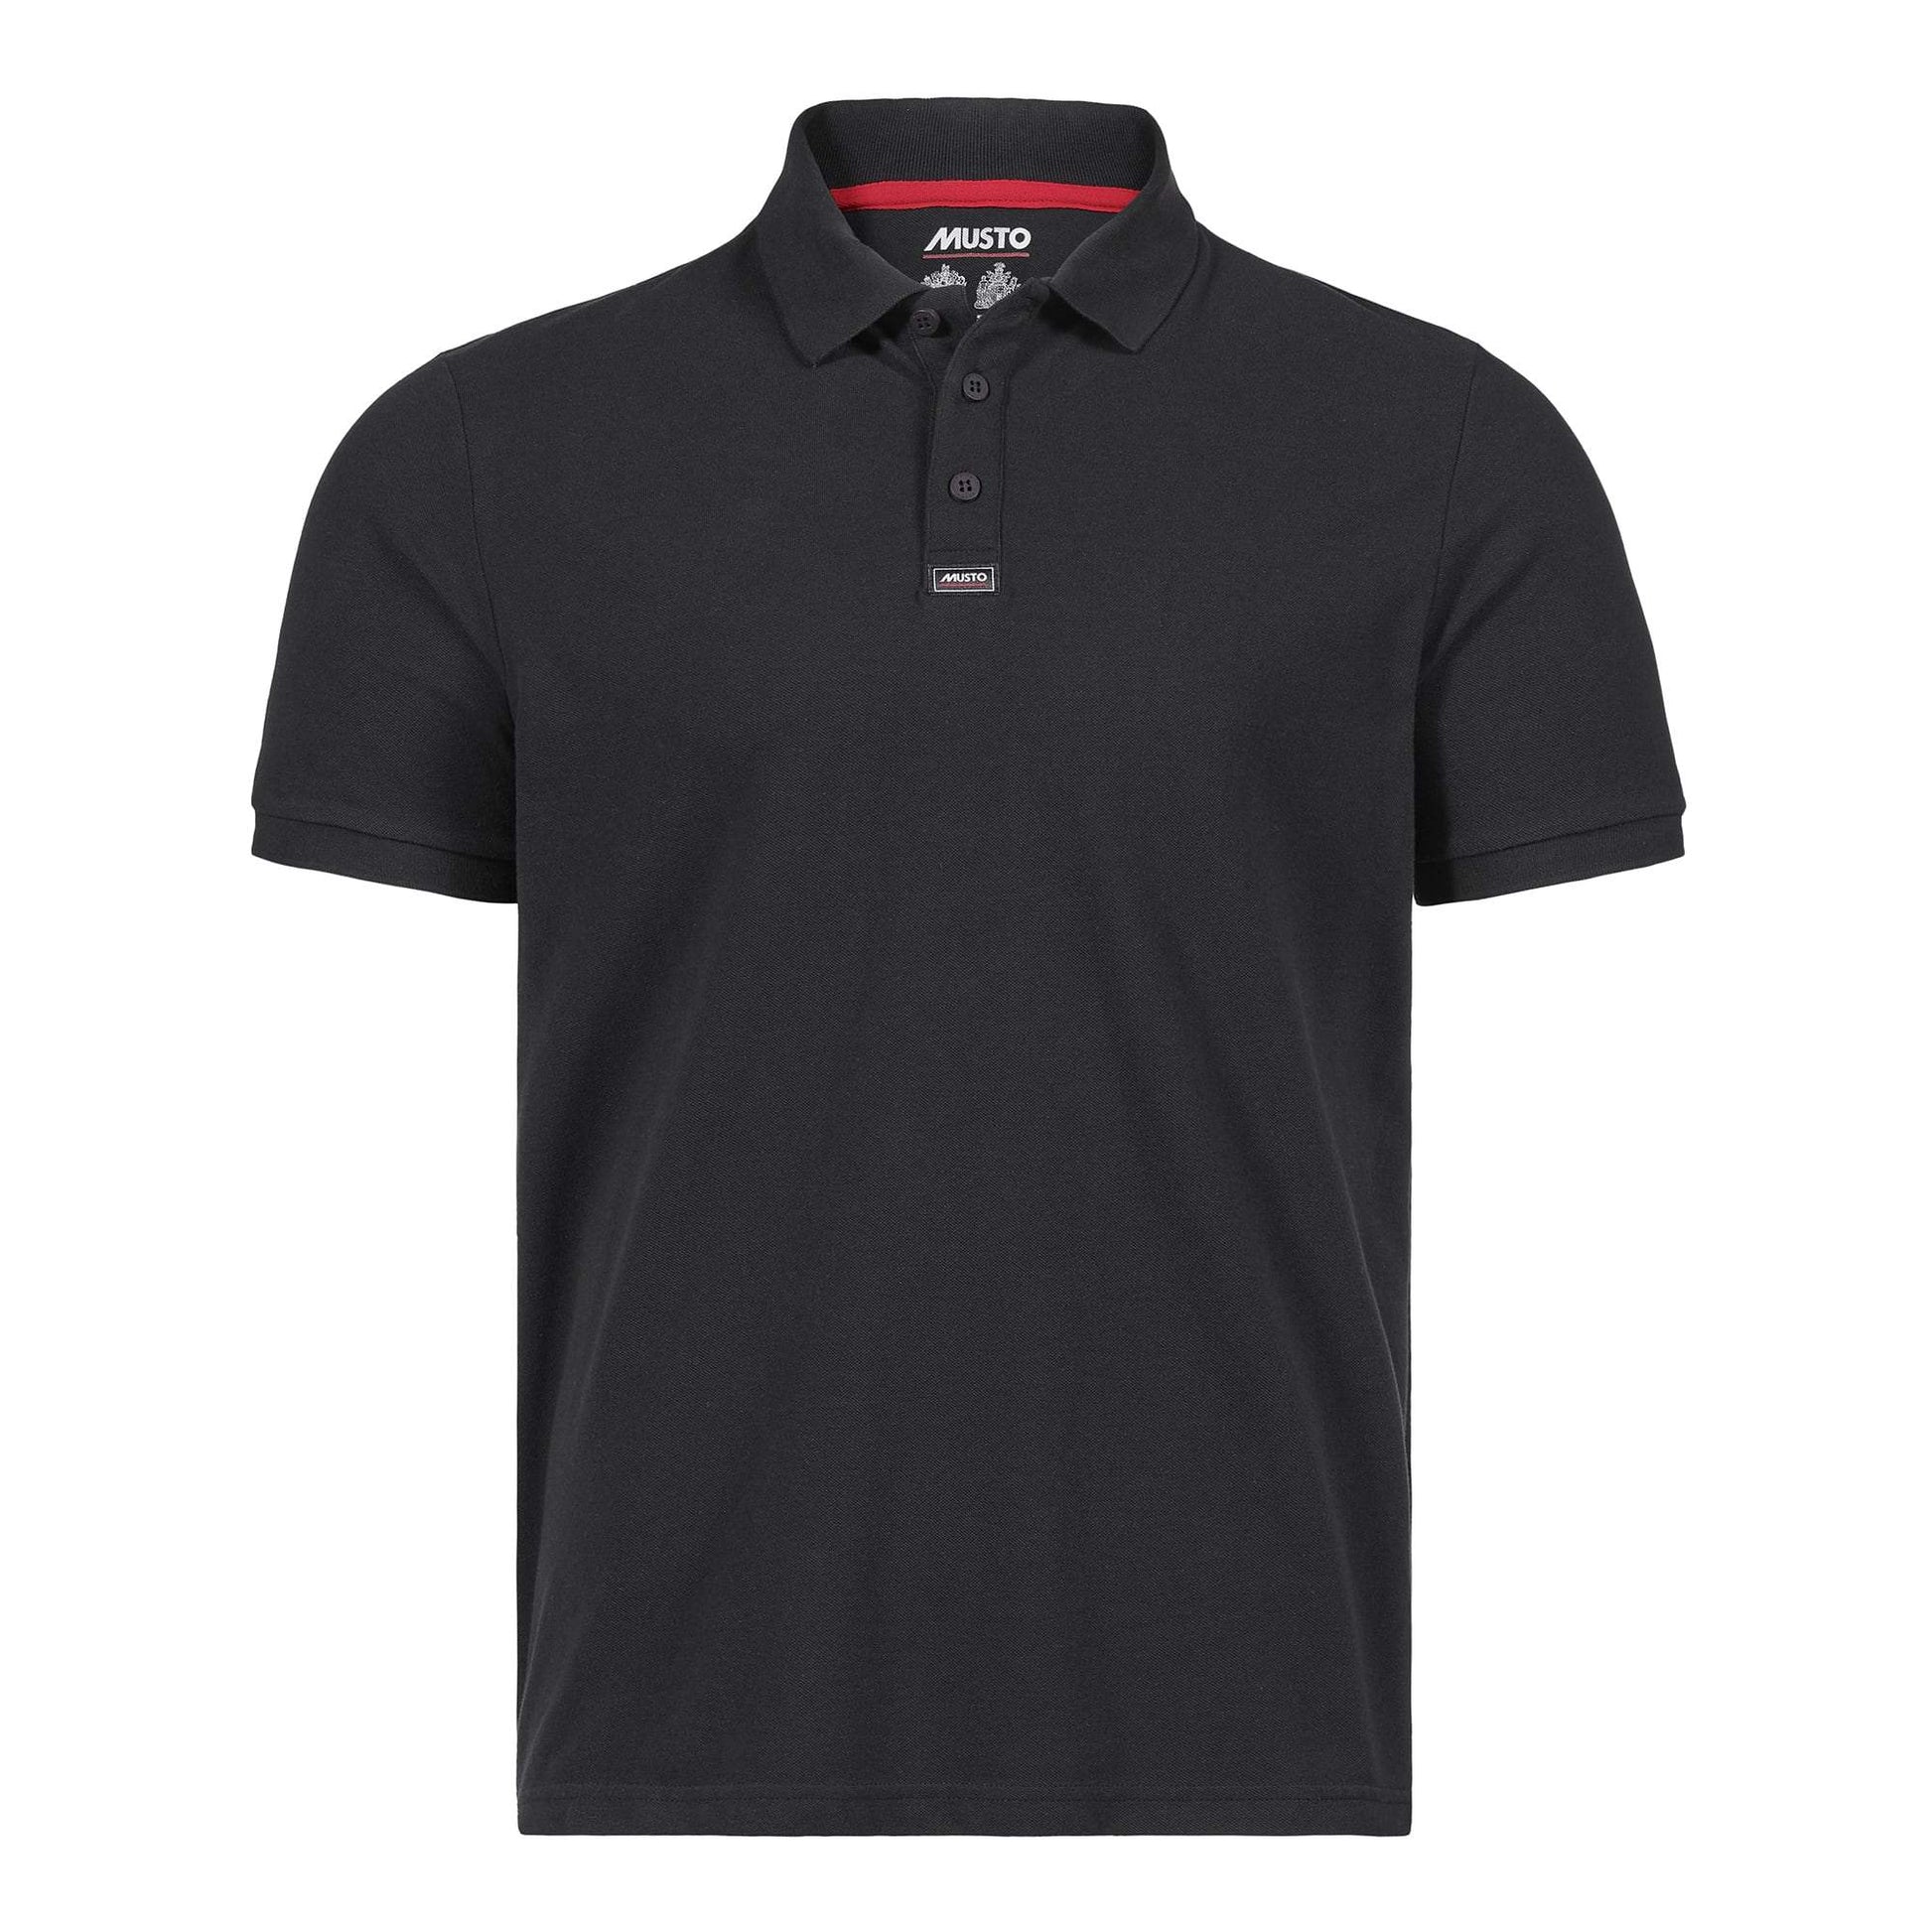 Men’s Ess Pique Polo by Musto - The Luxury Promotional Gifts Company Limited